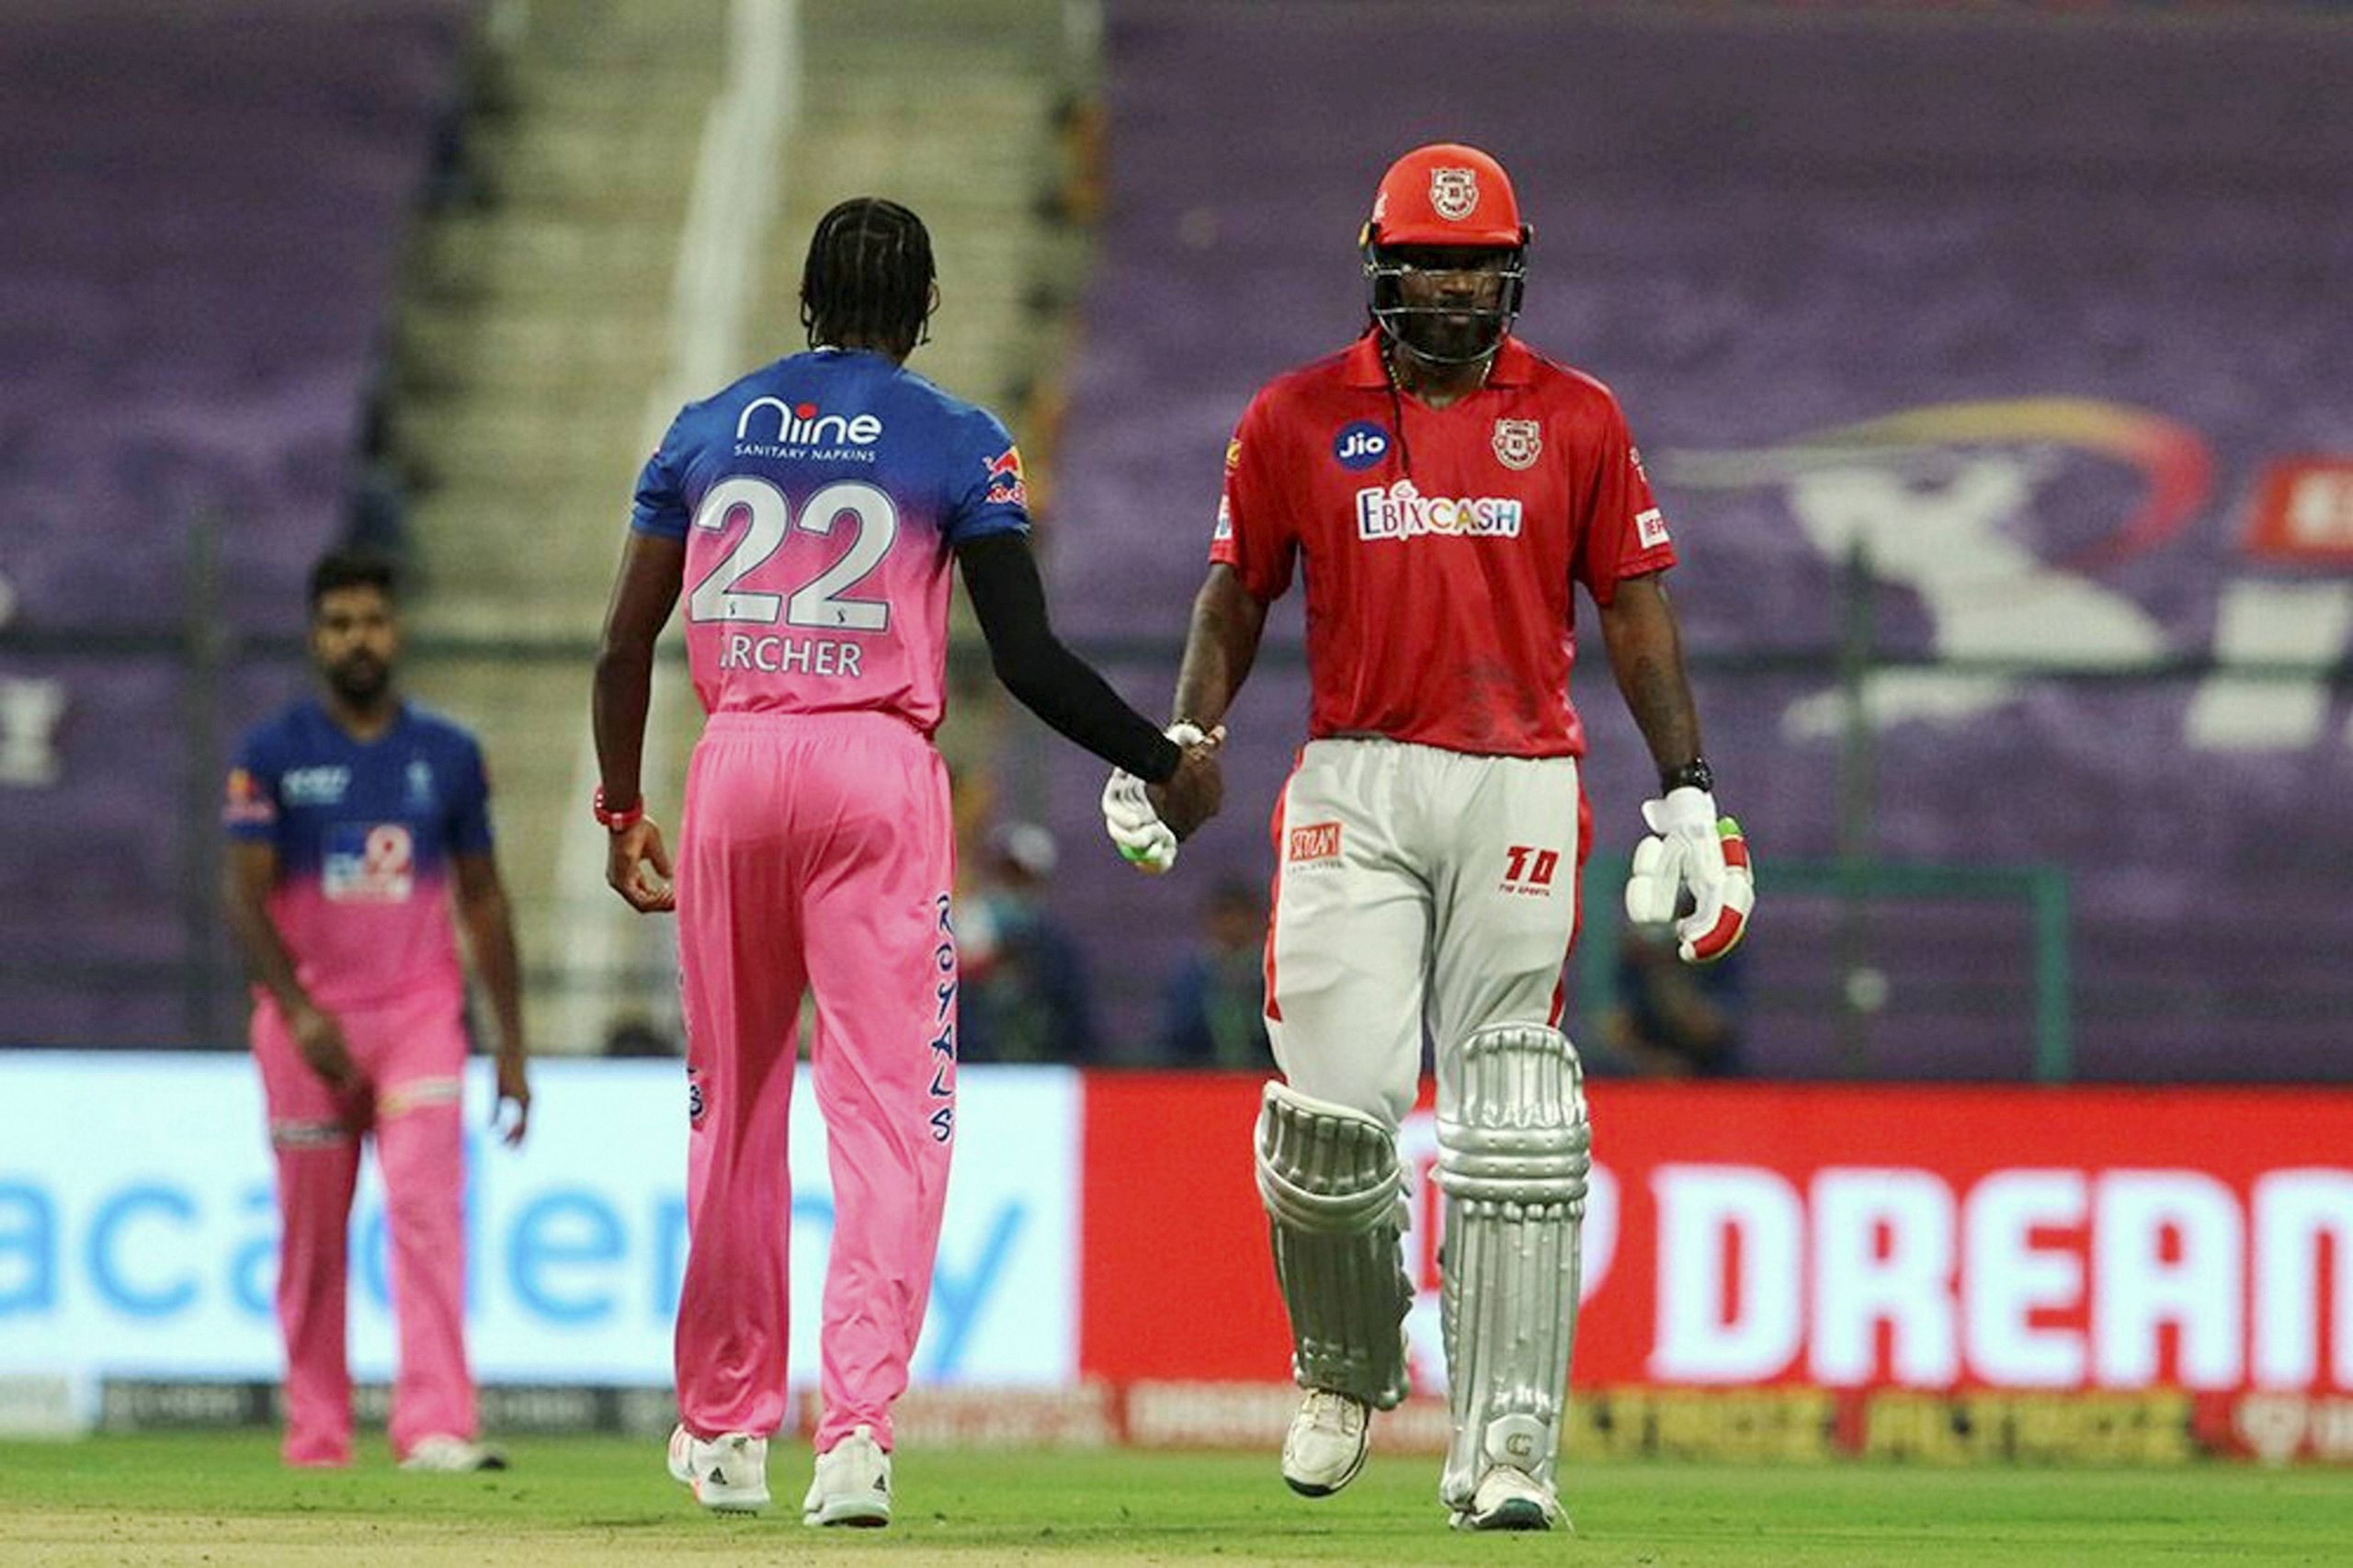 IPL 2021, PBKS vs RR: When and where to watch live telecast, streaming